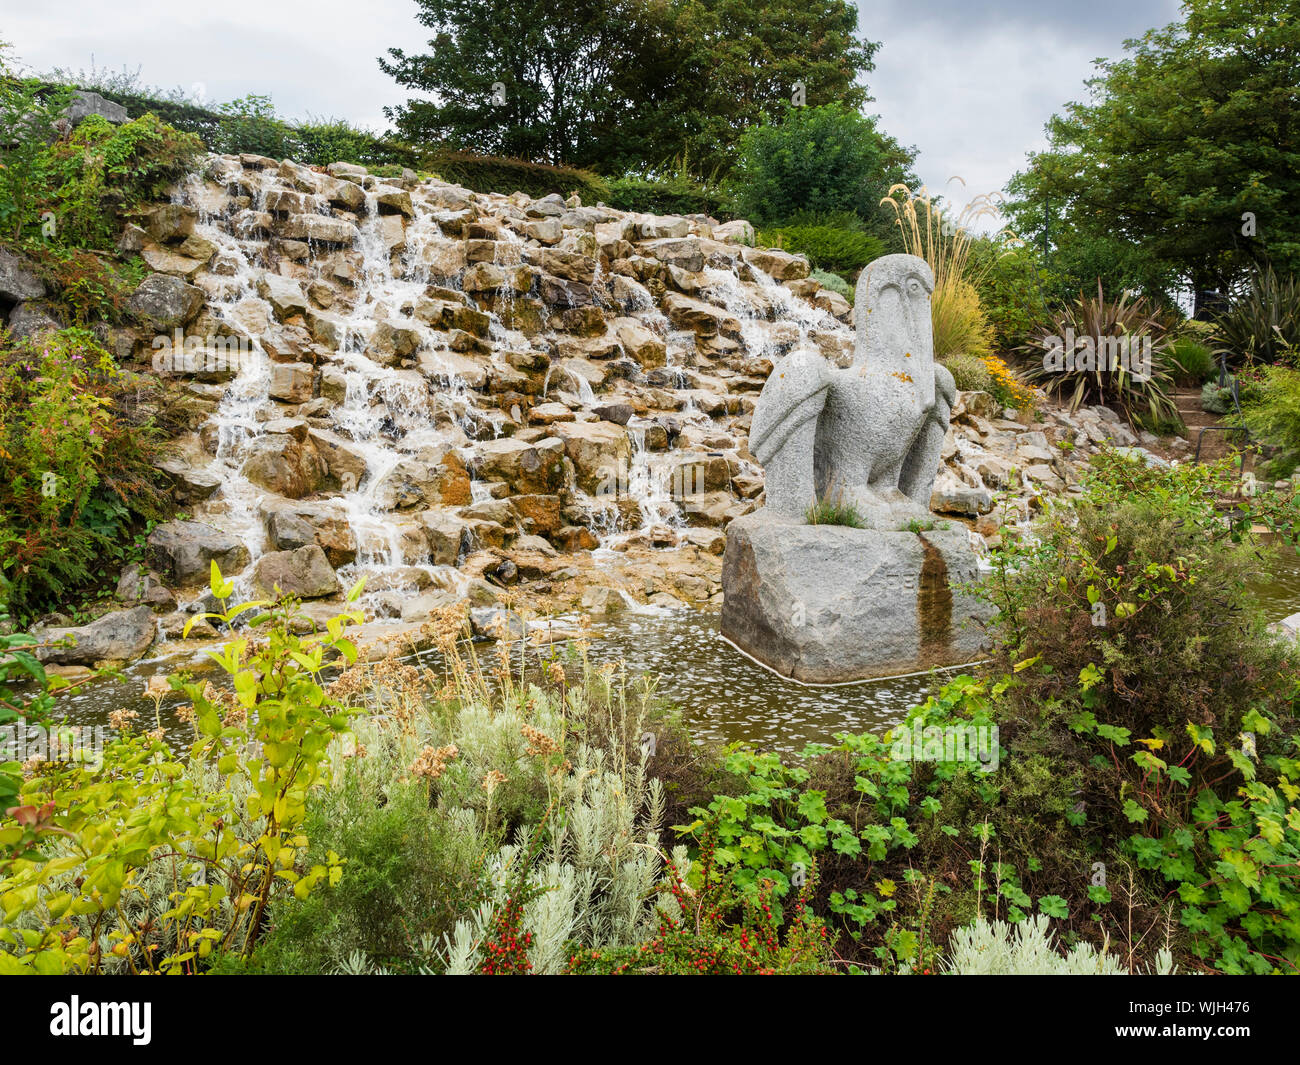 Pelican statue and waterfall on the seafront at Cleethorpes, the North East Lincolnshire resort Stock Photo